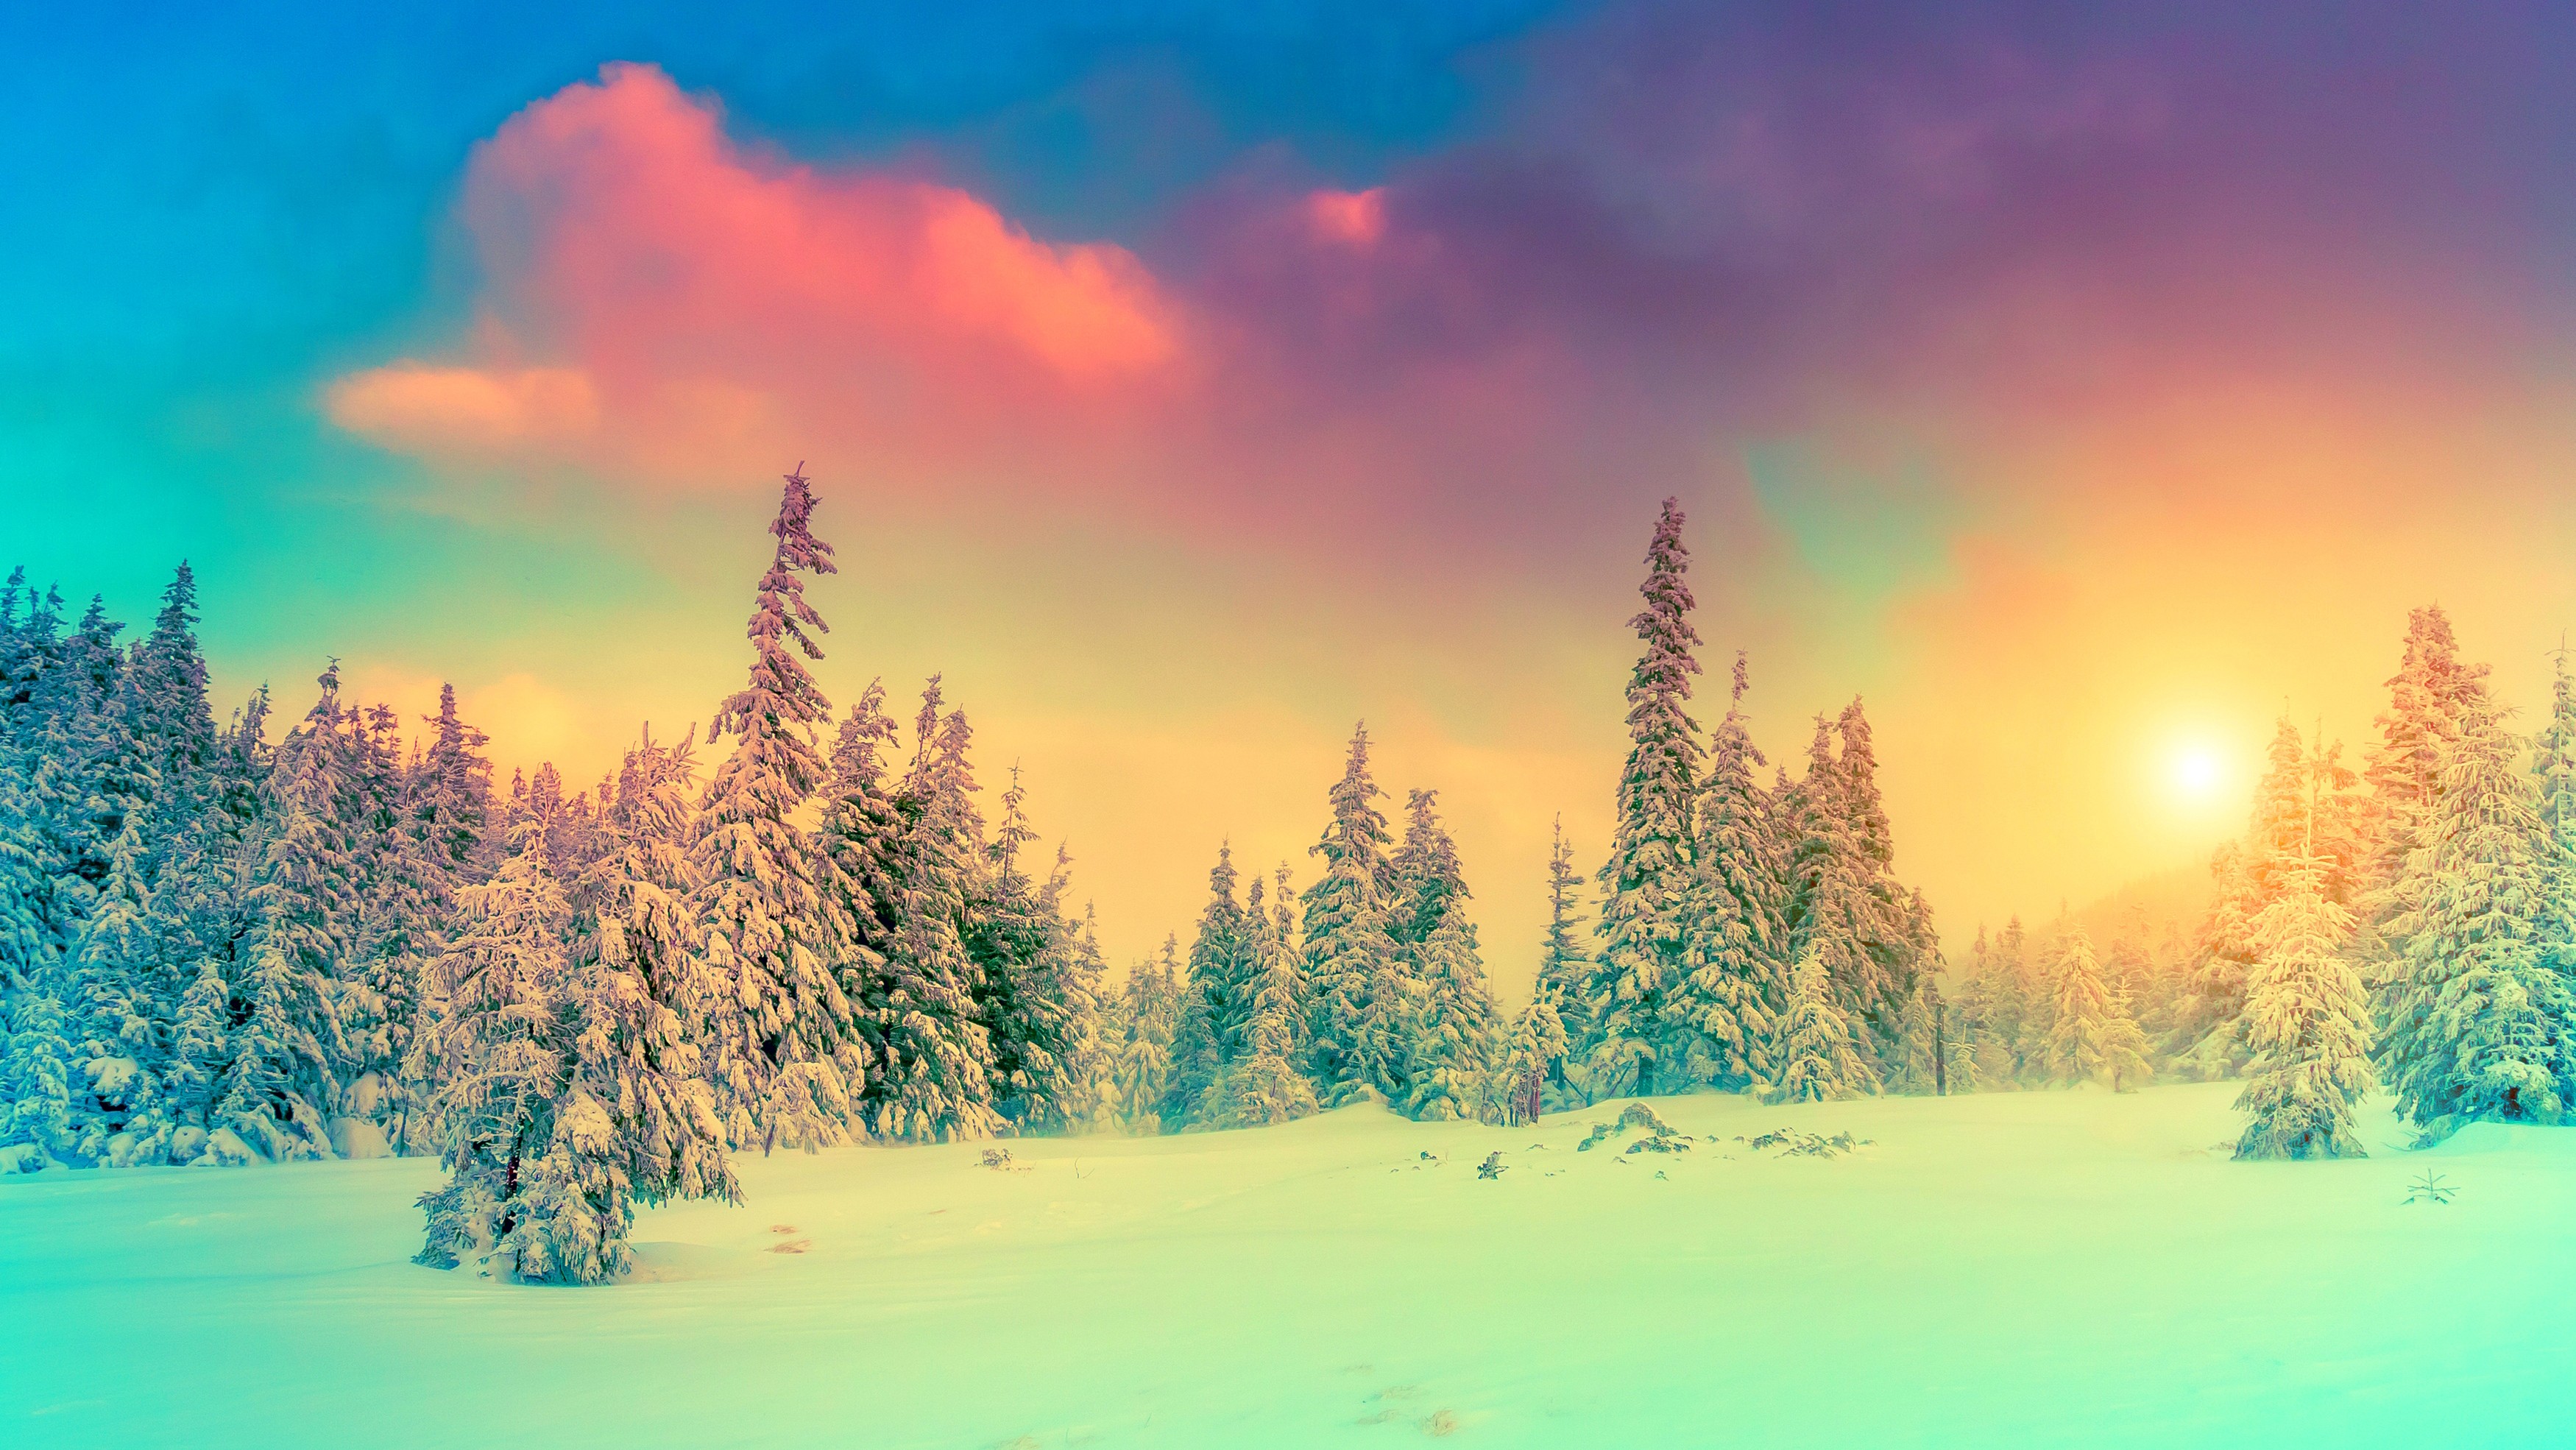 General 3500x1970 snow winter nature landscape cold outdoors trees sky